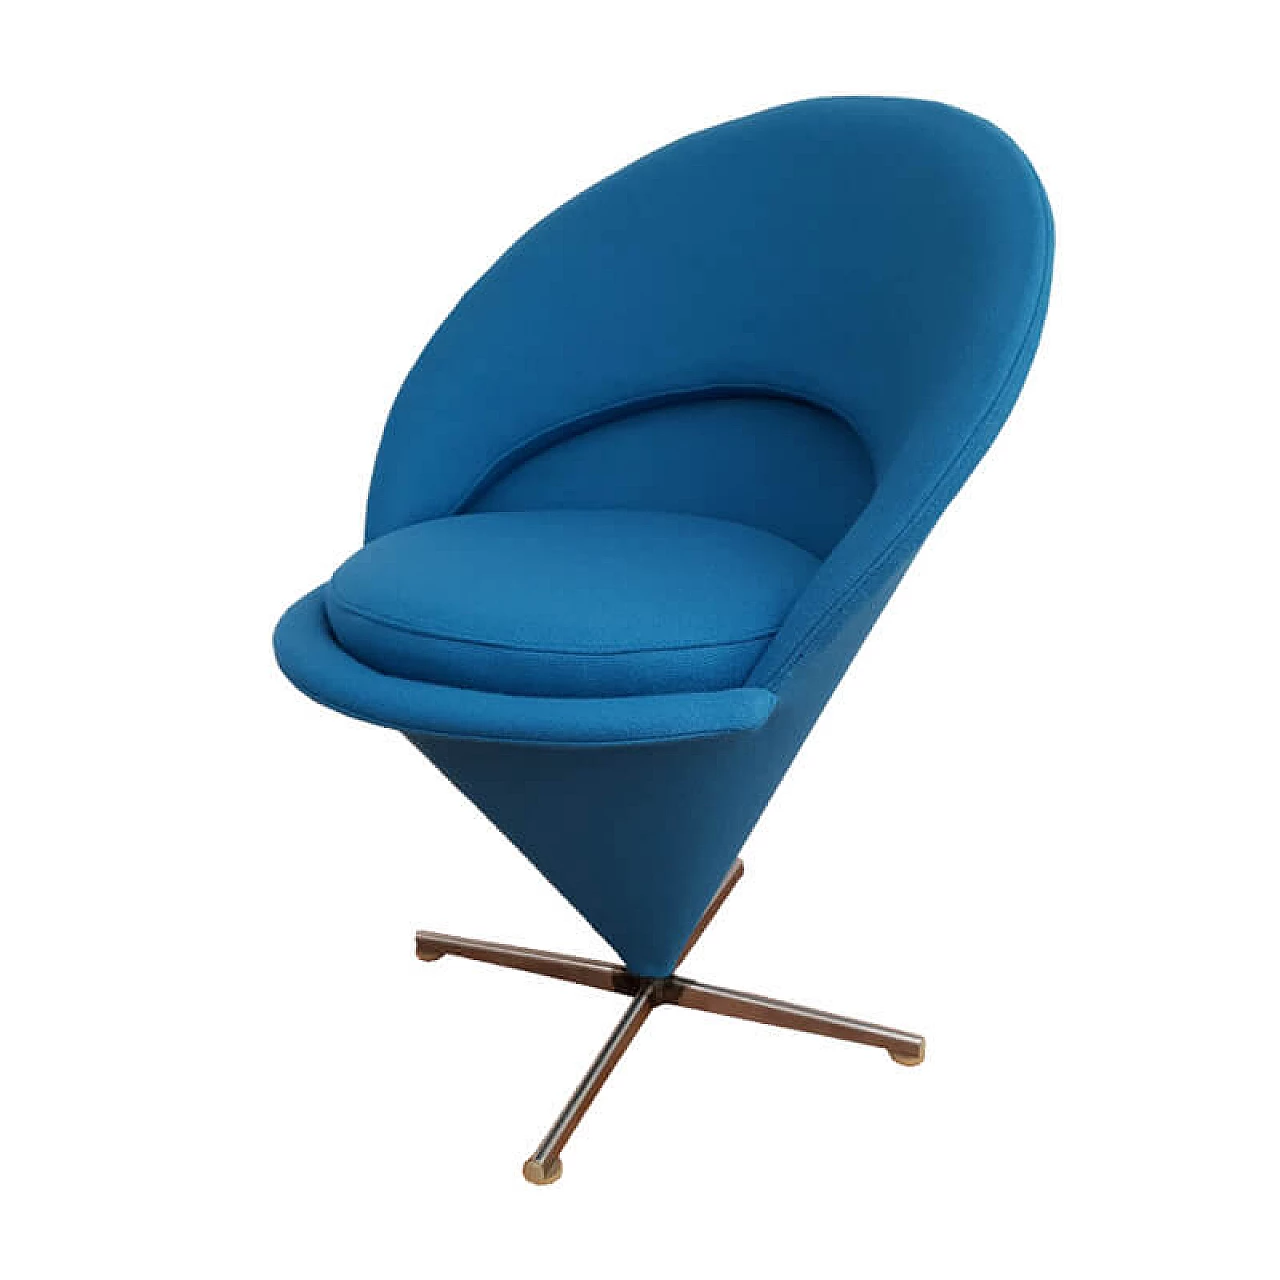 Danish design, Verner Panton, "Cone chair" completely renovated, 70s 1075089